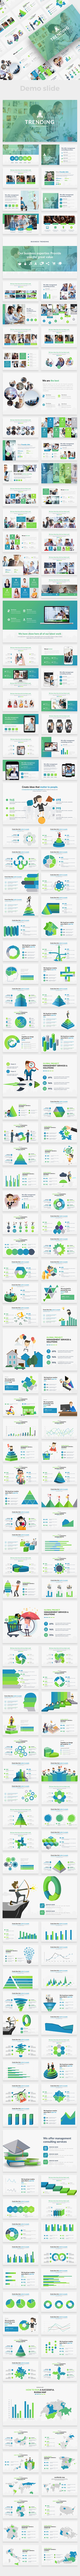 GraphicRiver Trending Multipurpose Powerpoint Template 20819338